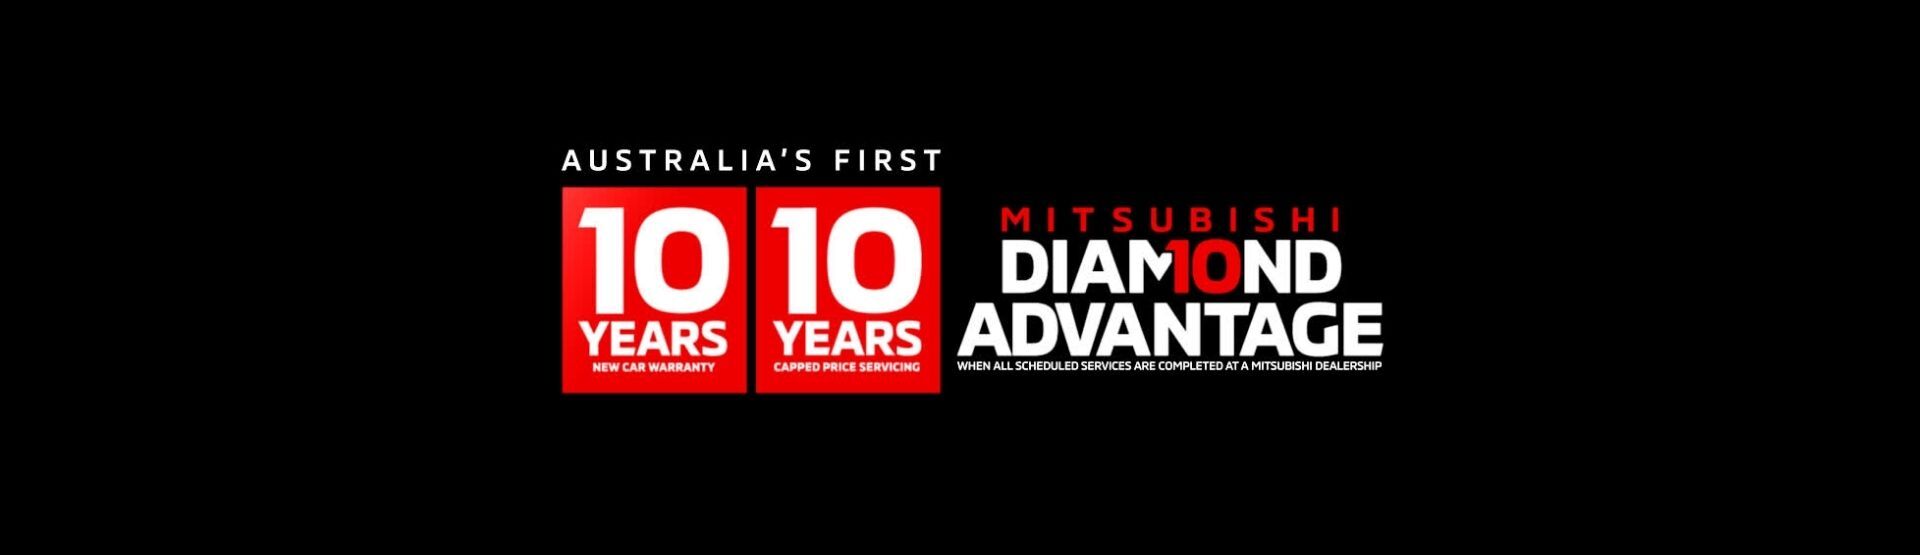 Mitsubishi Offers. Find out more.